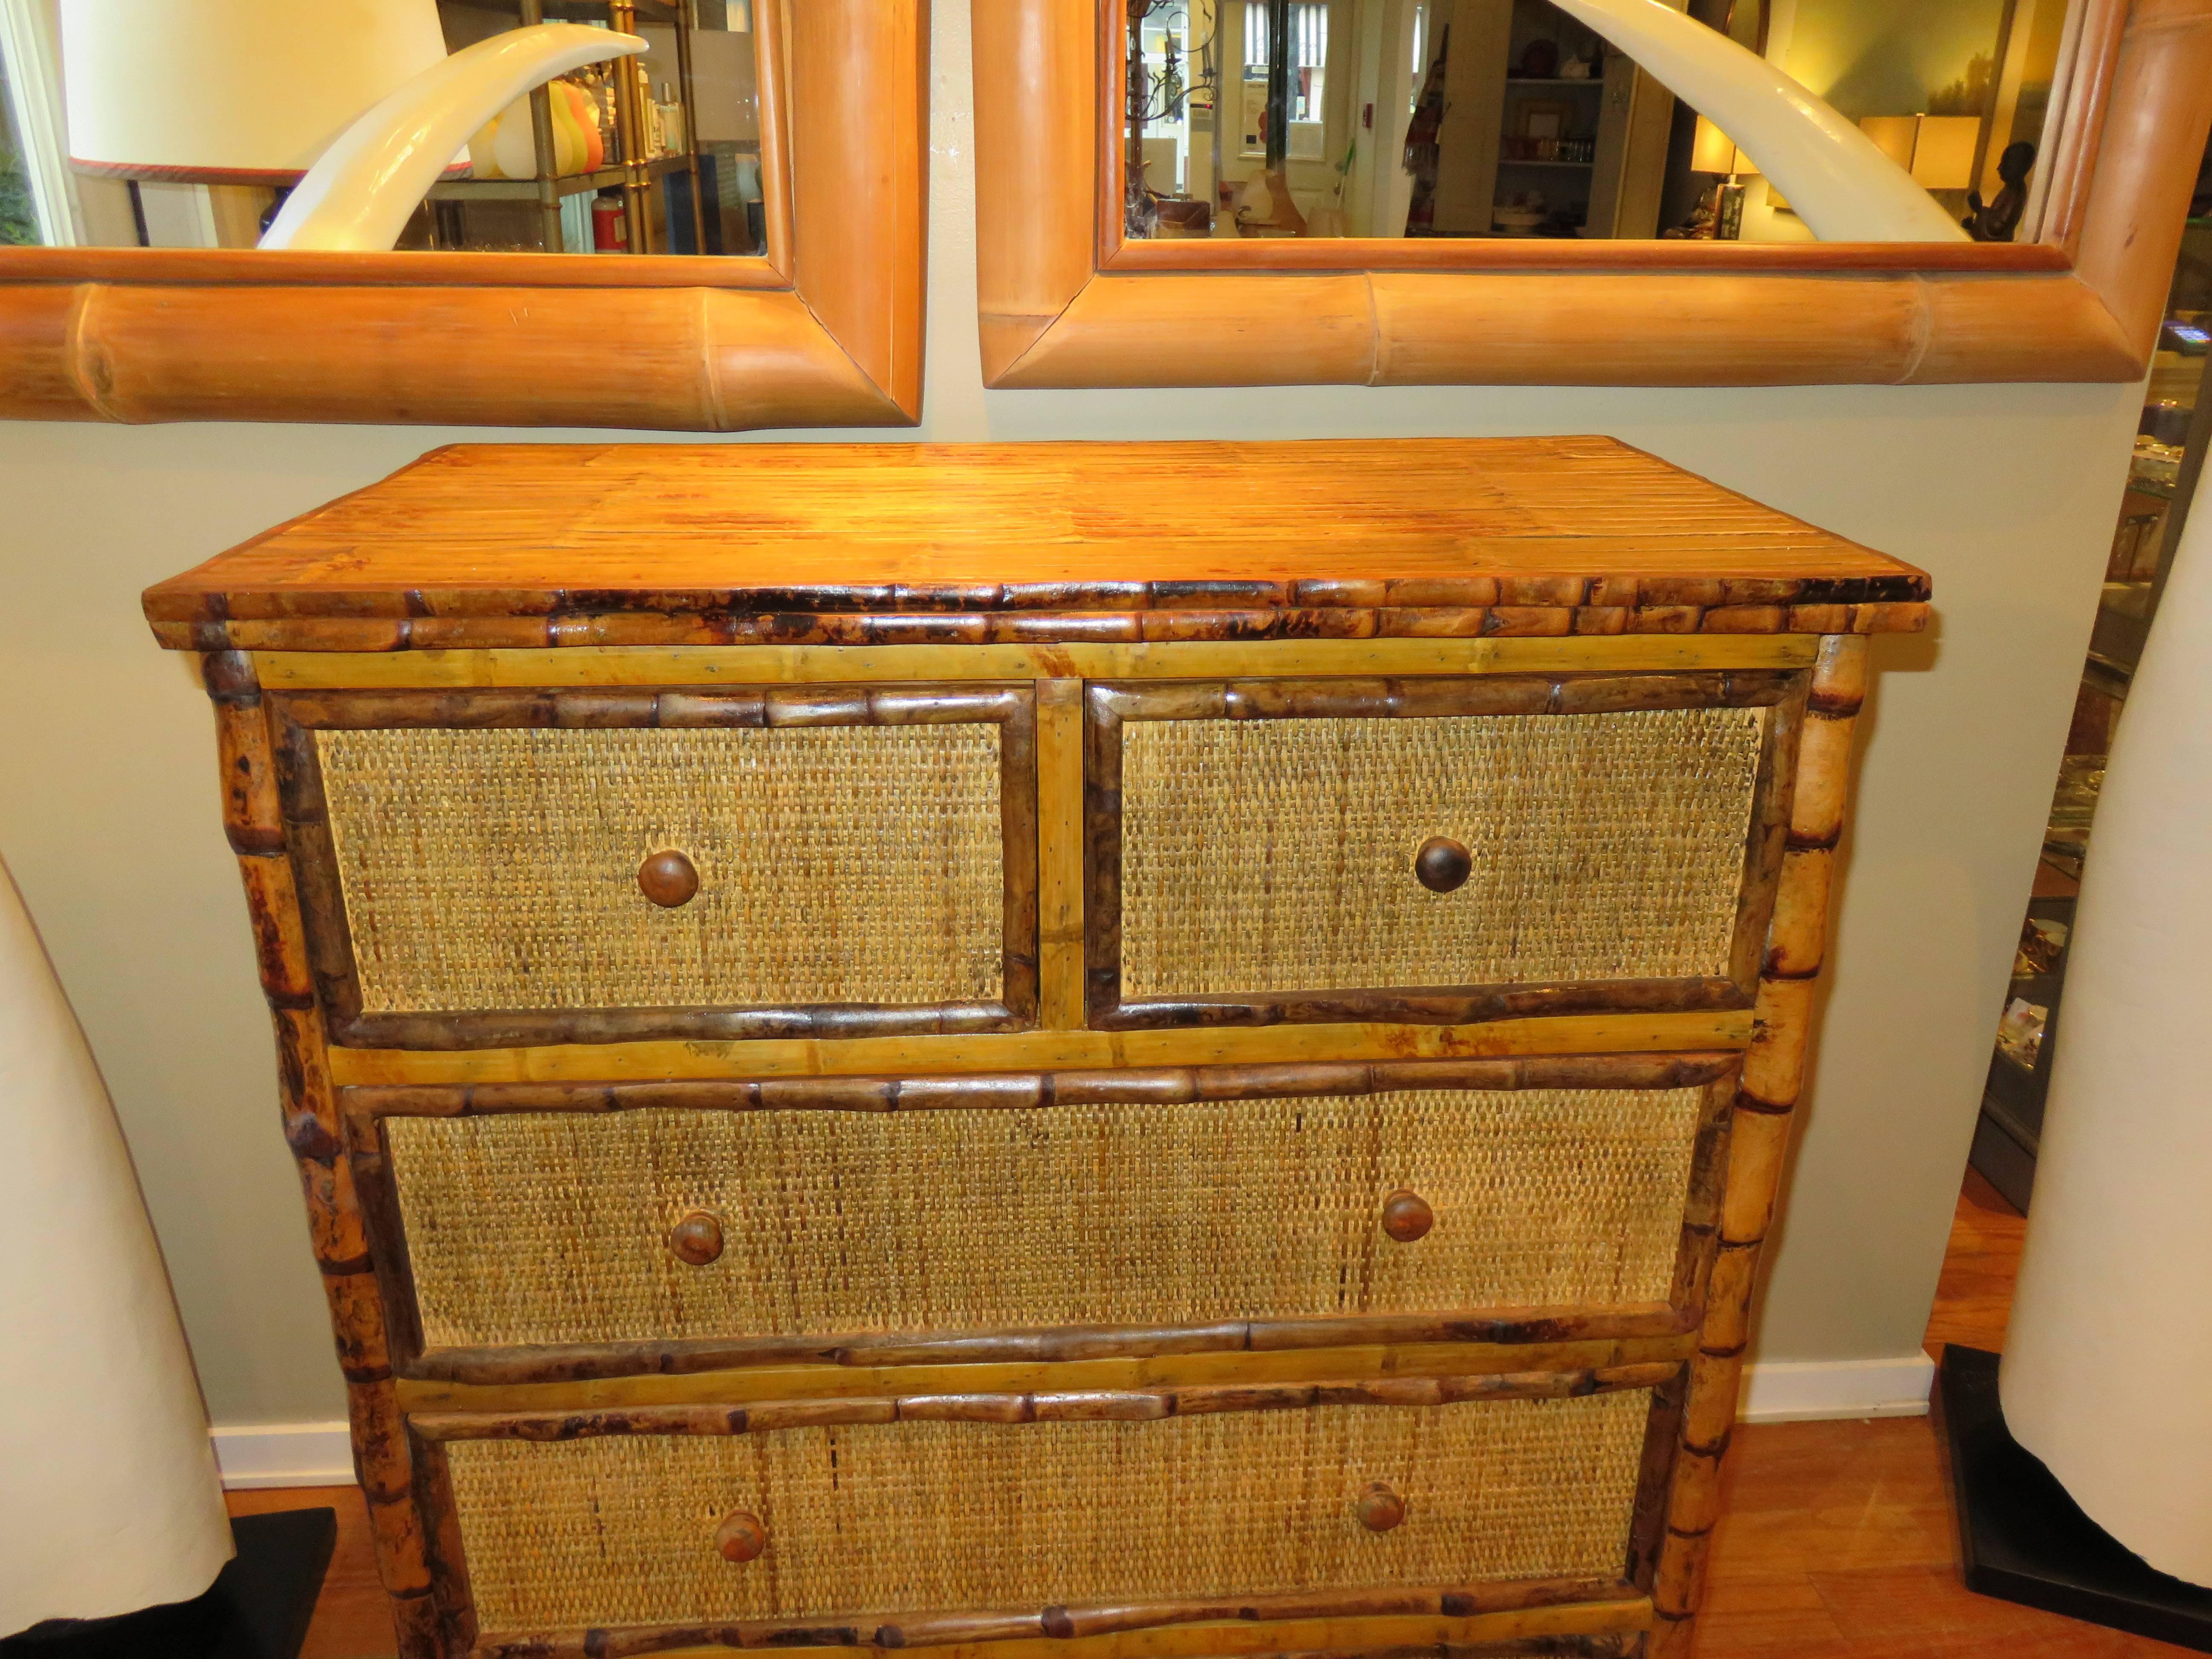 Bermudian Bamboo and Cane Dresser/Drawers